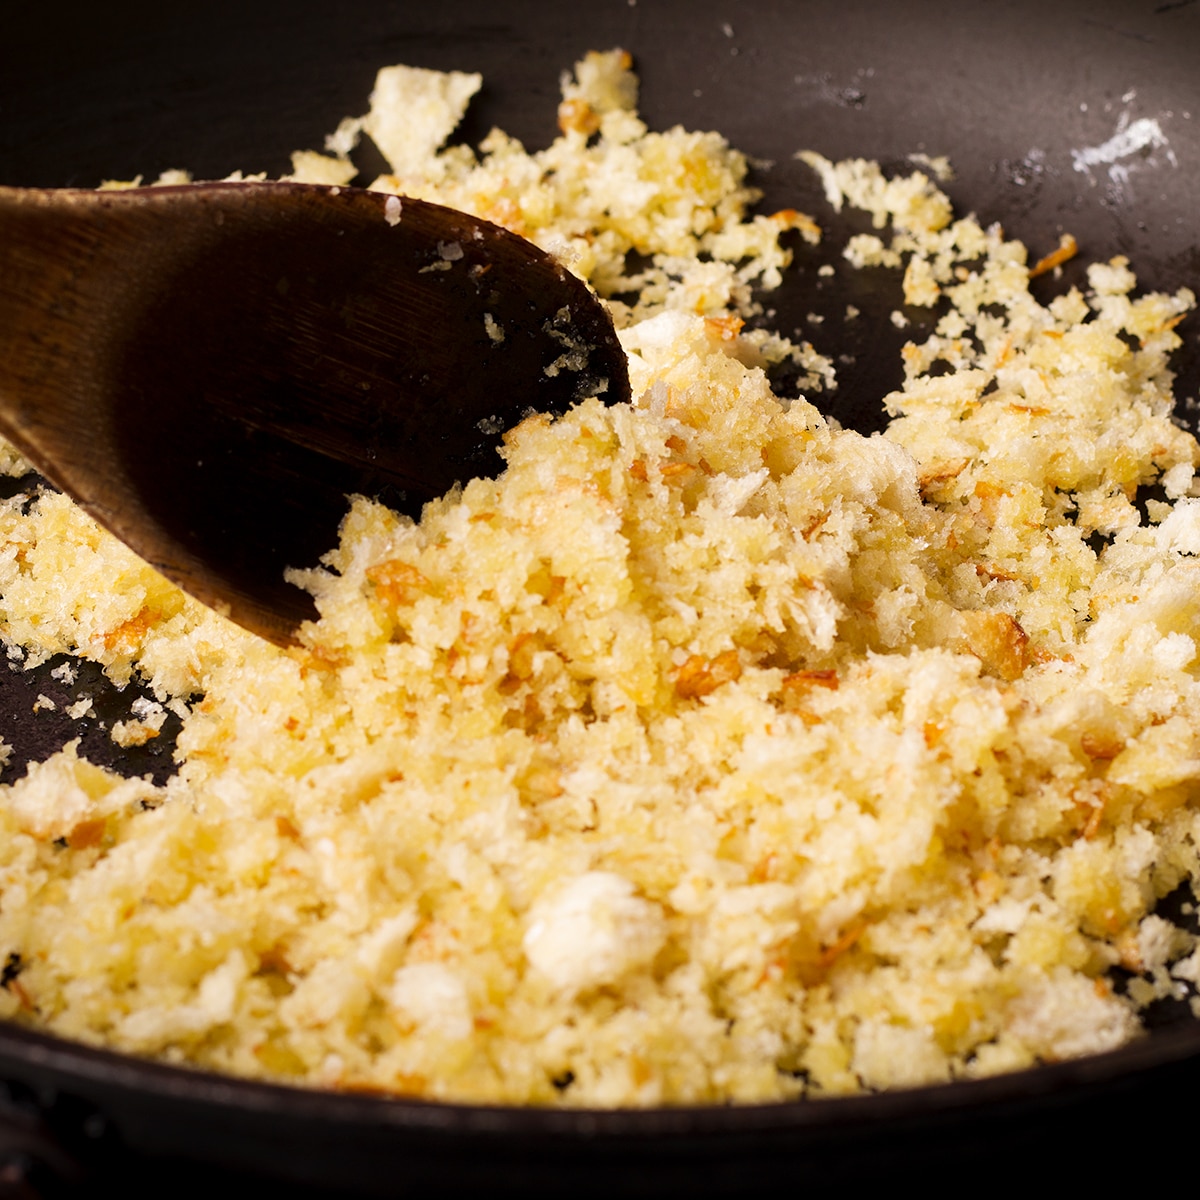 Using a wooden spoon to stir bread crumbs, garlic, and oil in a skillet.